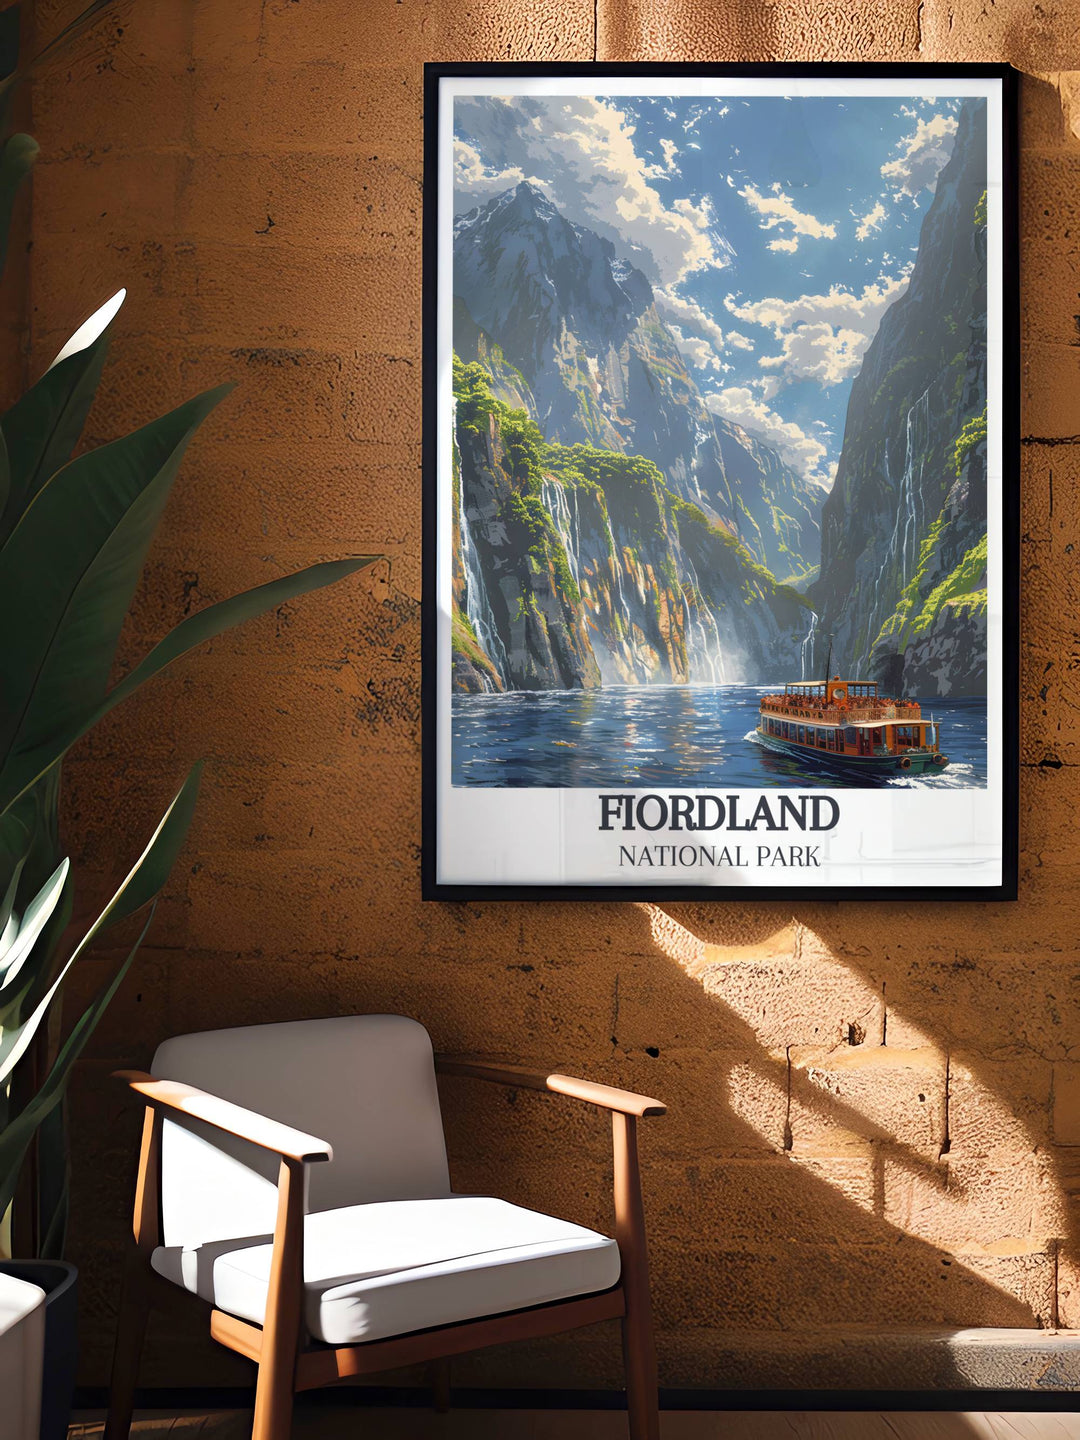 Beautifully captured Milford Sound at dawn, light casting golden hues over Mitre Peak and calm waters in this high quality art print.